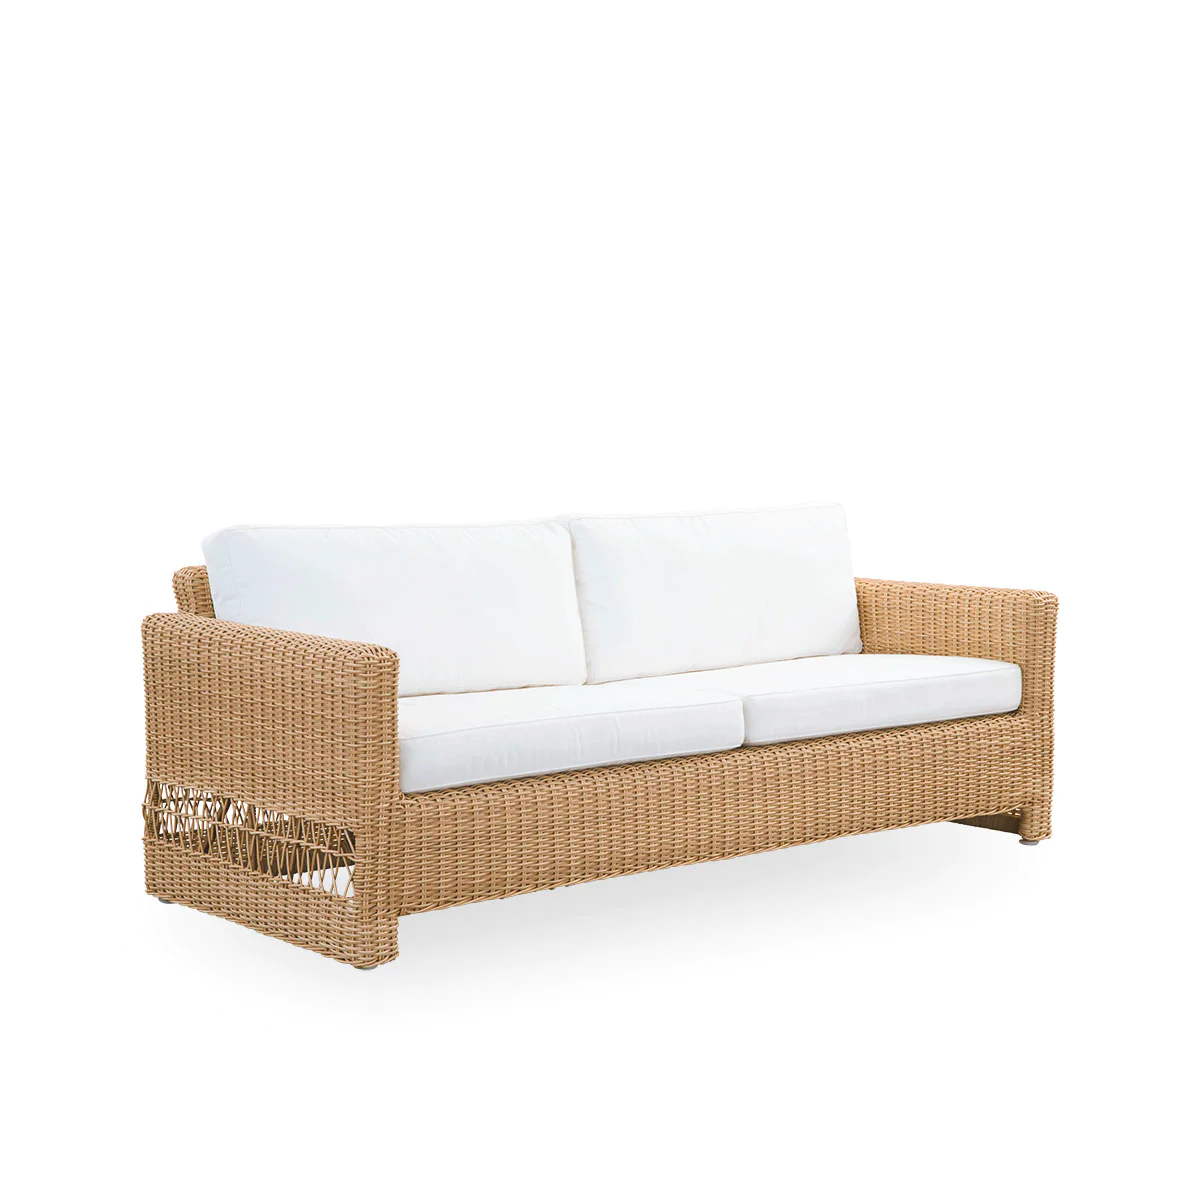 SIKA DESIGN CARRIE EXTERIOR SOFA NATURAL INKL HYNDER - 200